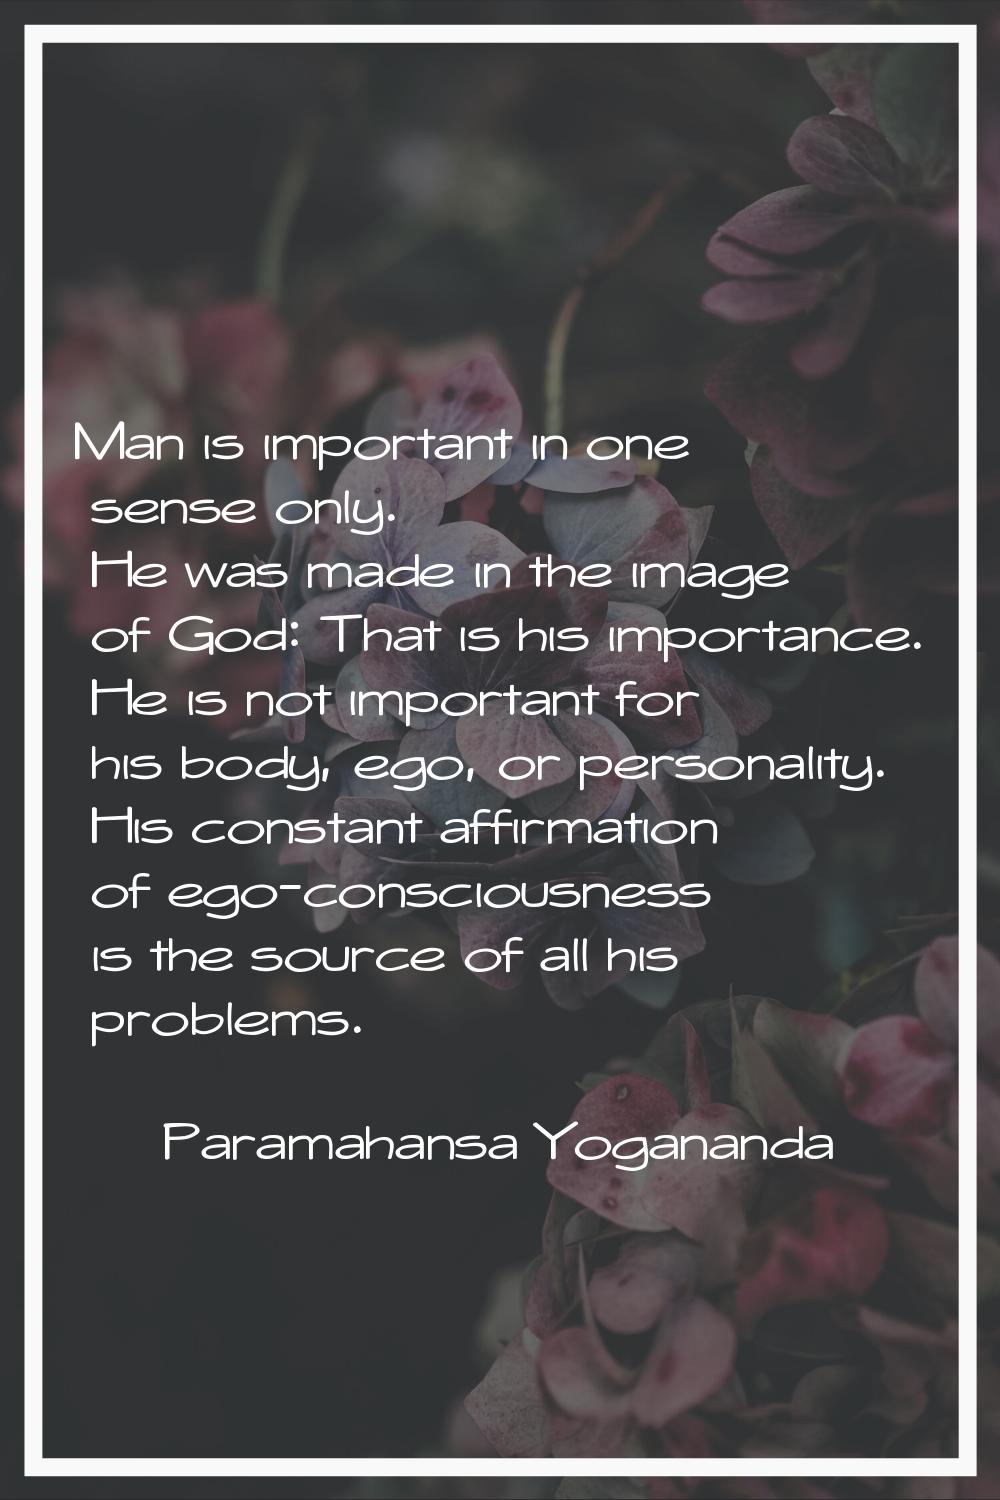 Man is important in one sense only. He was made in the image of God: That is his importance. He is 